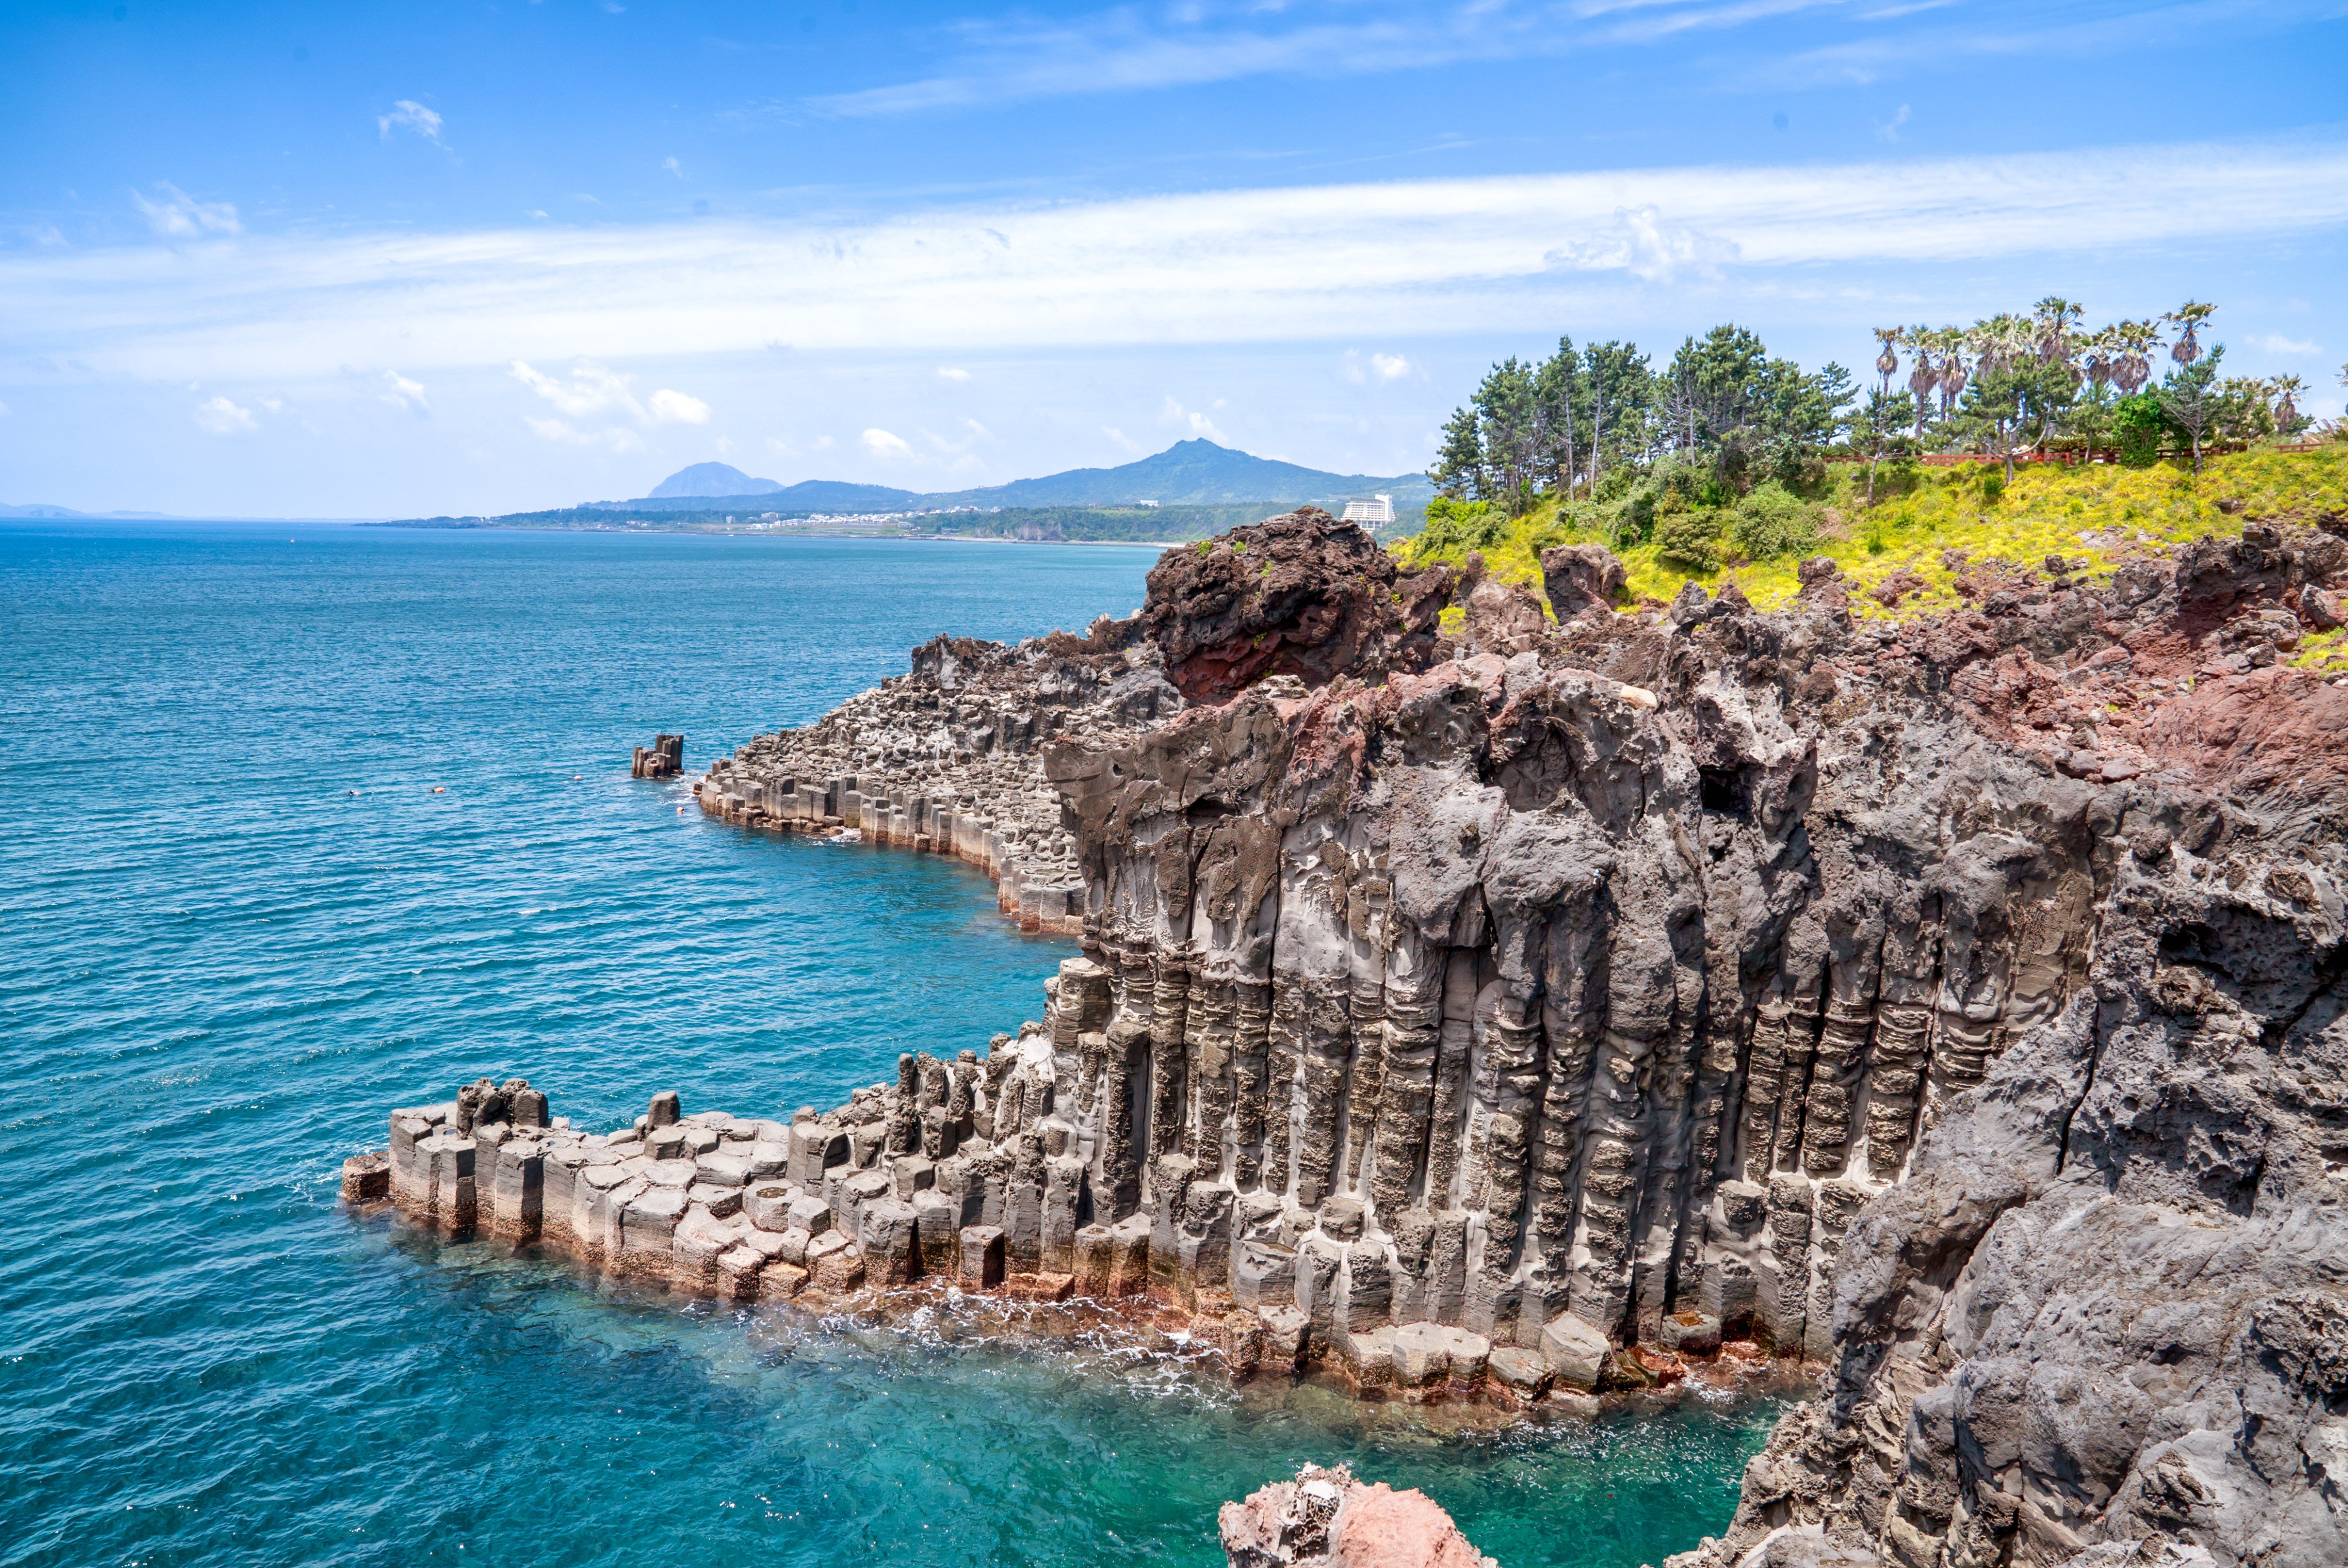 Asia Times has named the South Korean holiday destination of Jeju as “Asia’s coolest island”. Photo: Getty Images